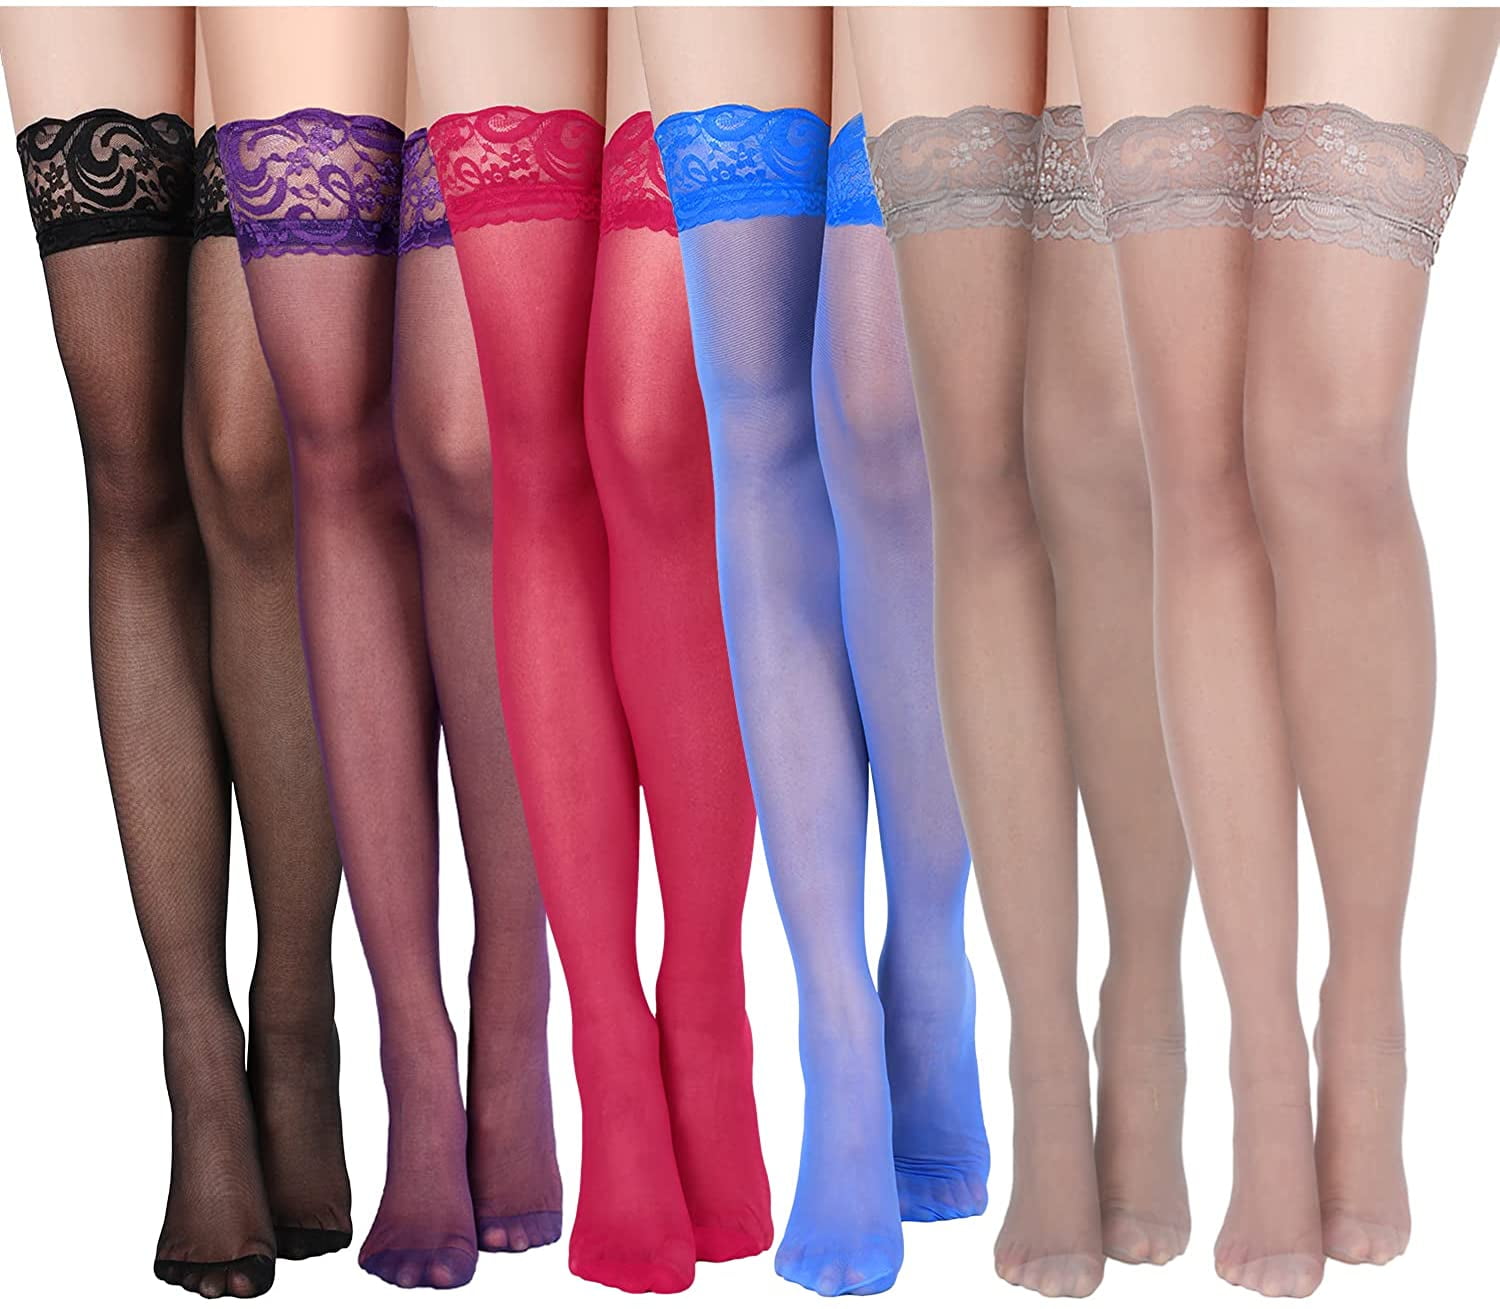 6 Pairs Thigh High Stockings Lace Tights Silky Semi Sheer Stocking for  Women Girls 